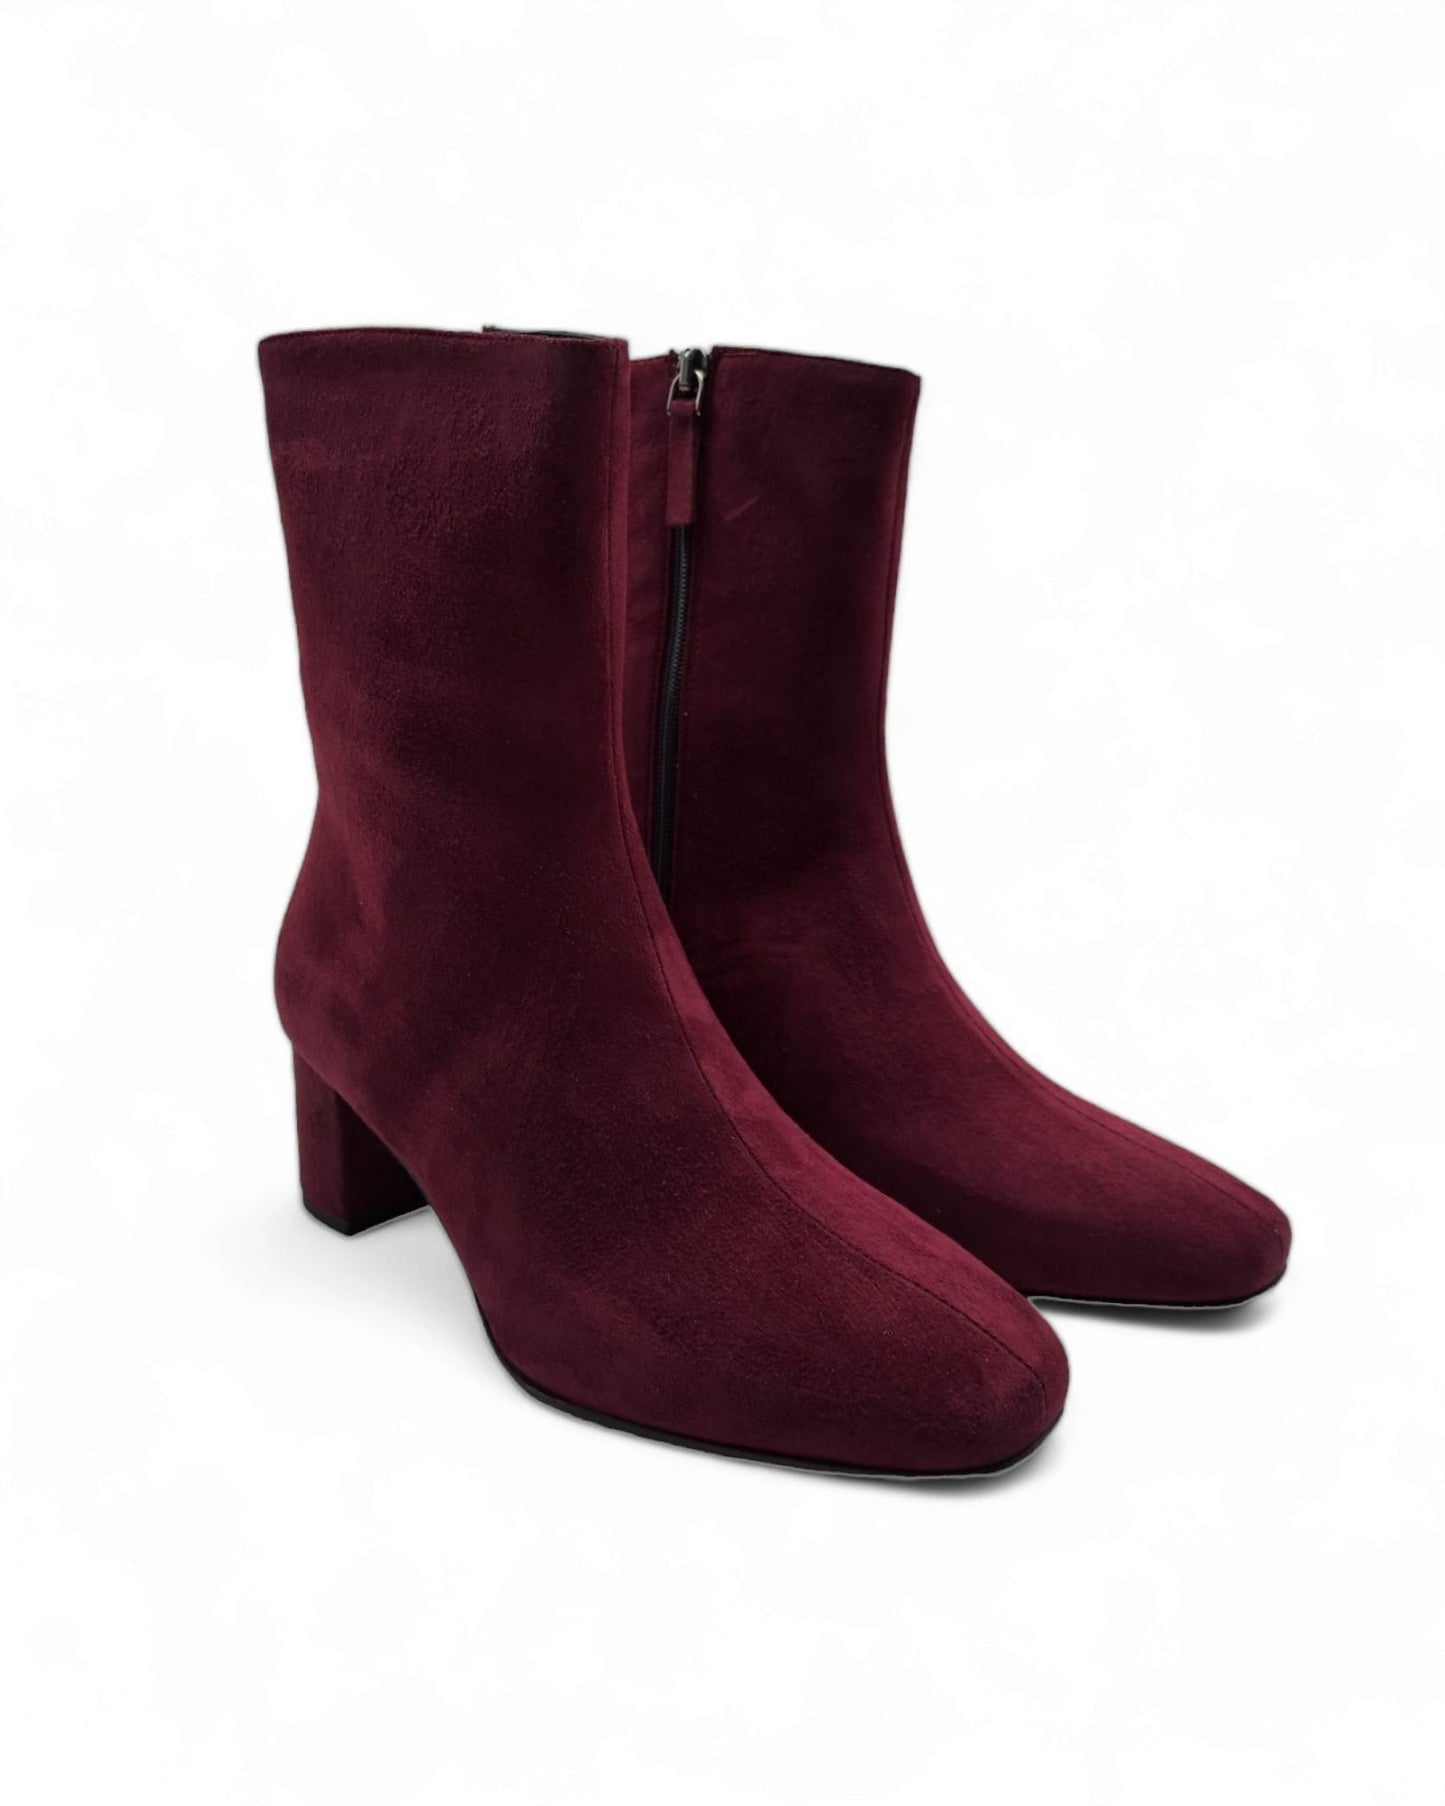 Silvana ankle boot in Barolo suede